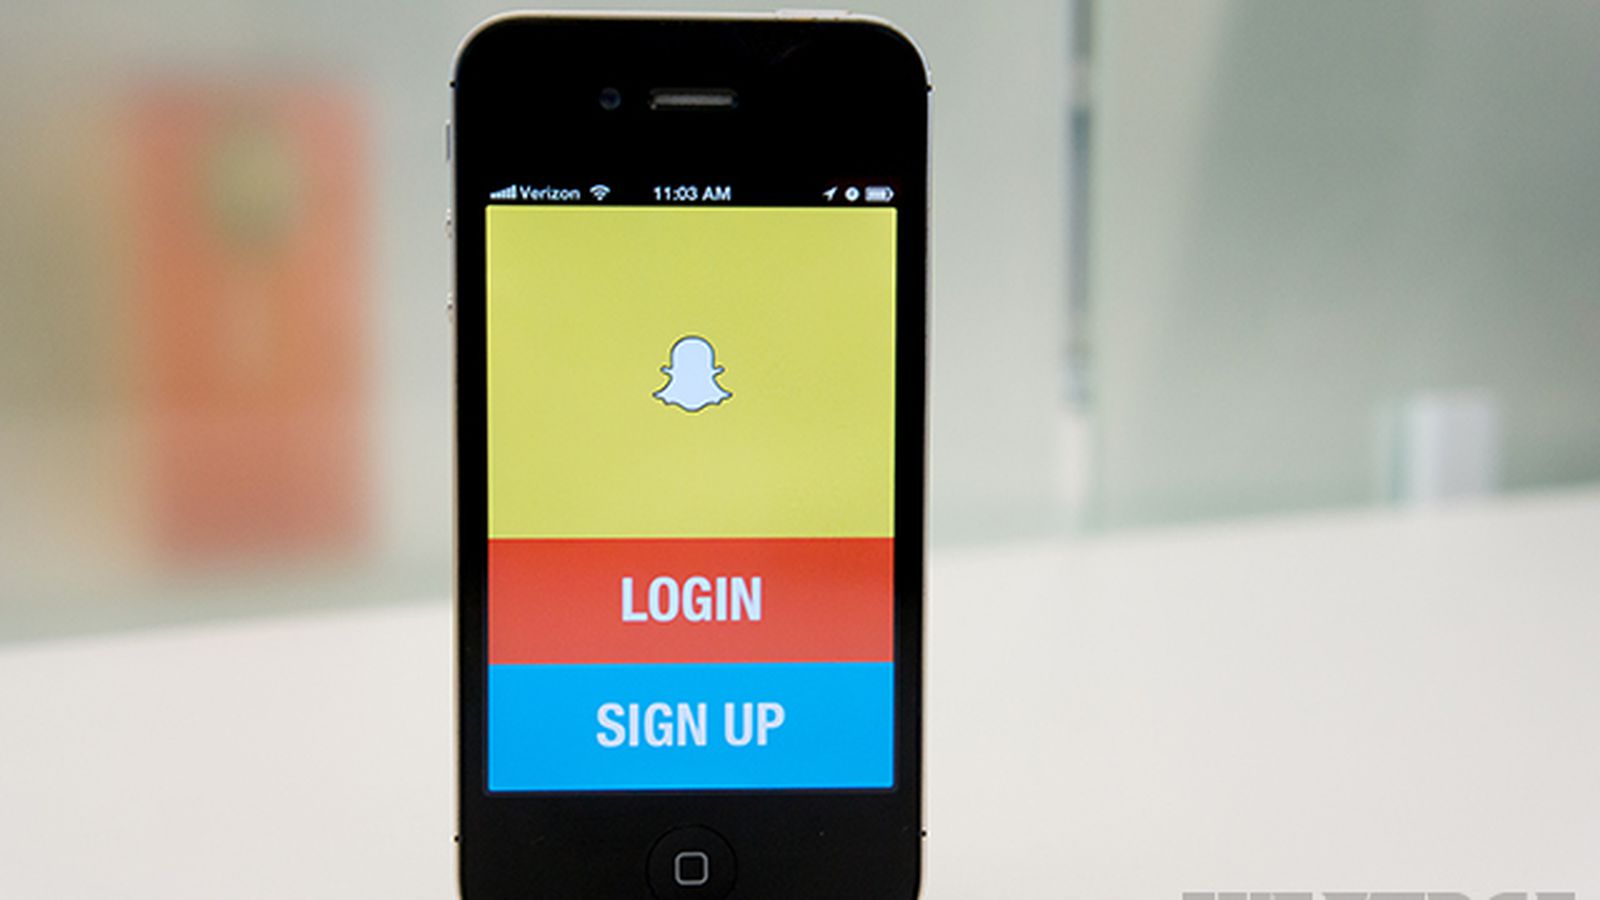 4.6 million Snapchat phone numbers and usernames leaked - The Verge